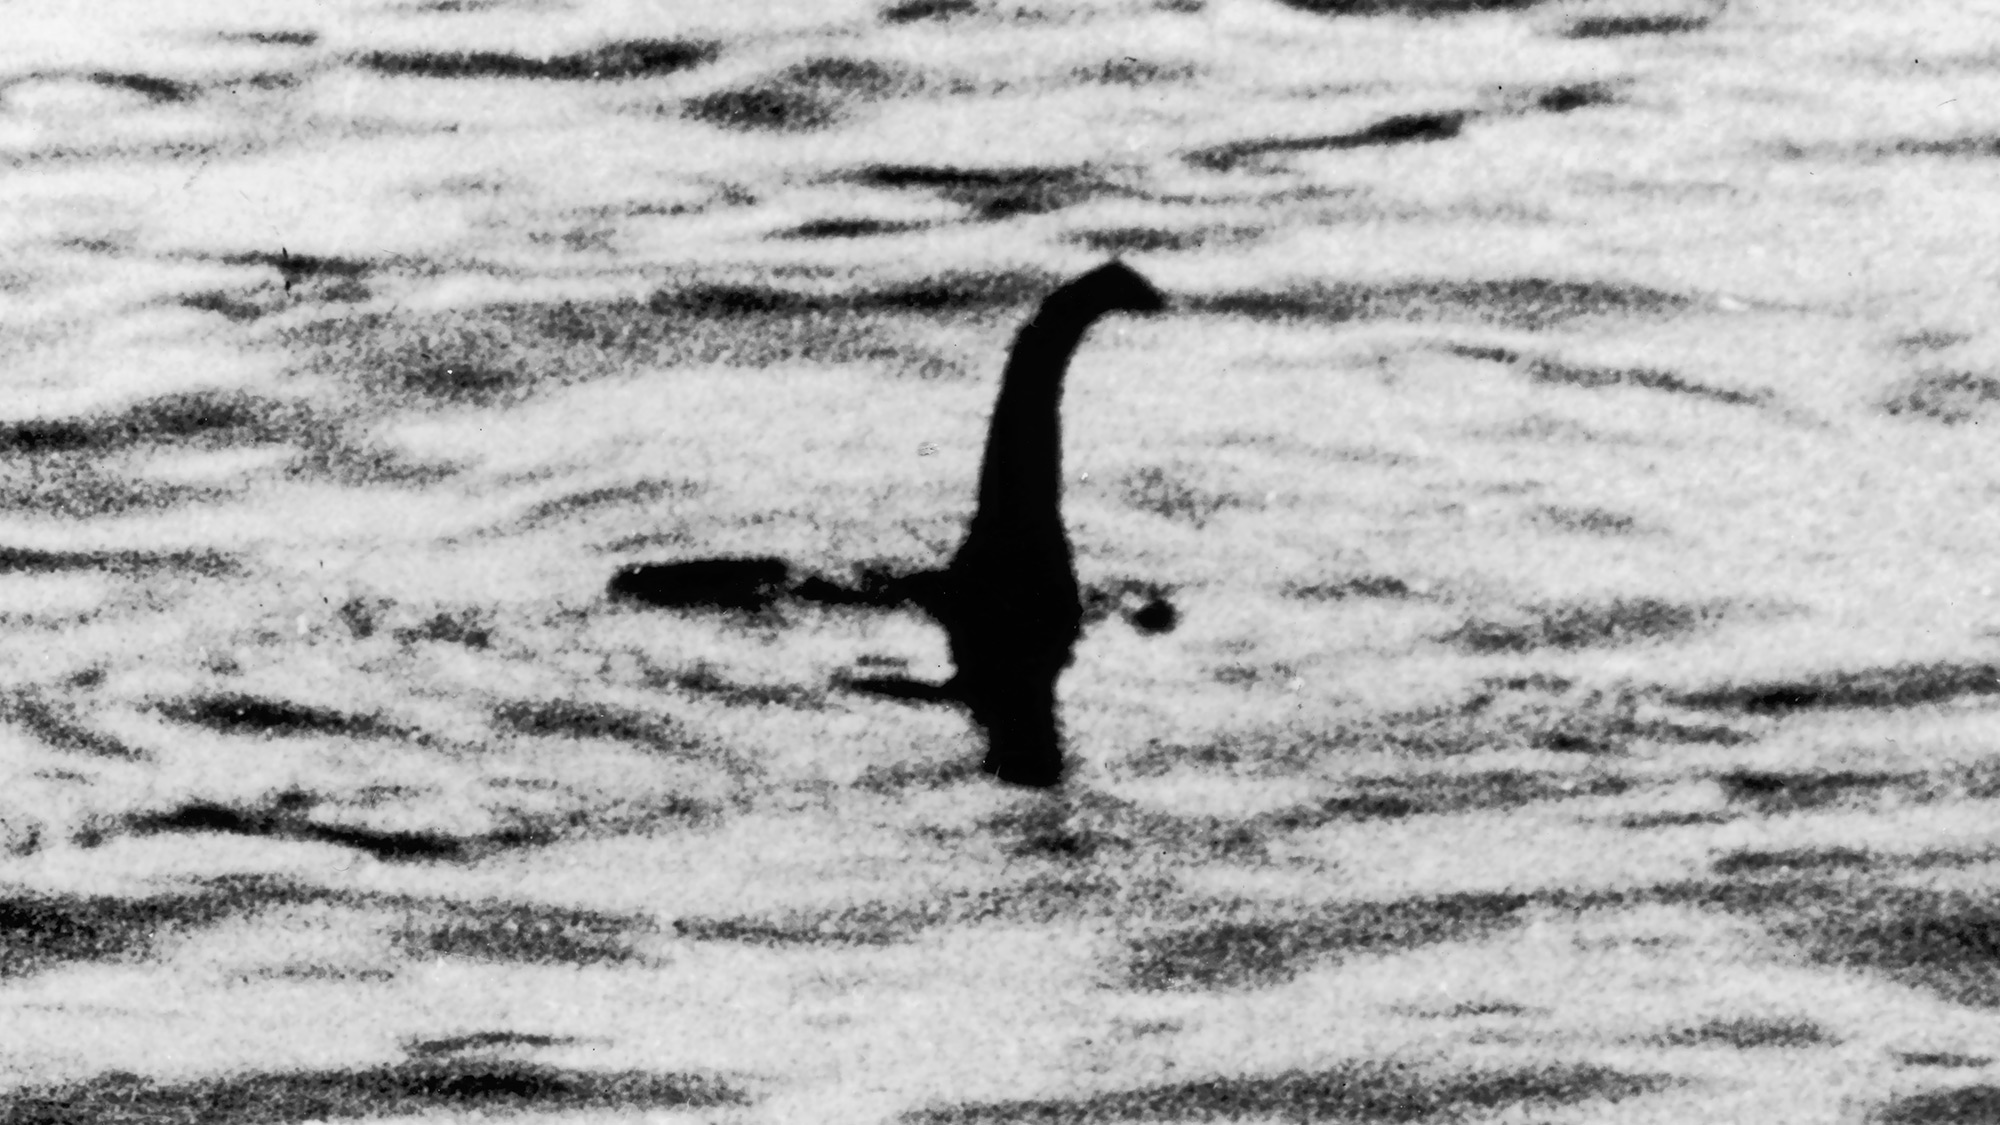 This famous photograph of Nessie from 1934 turned out to be a hoax created with a toy submarine and a fake 